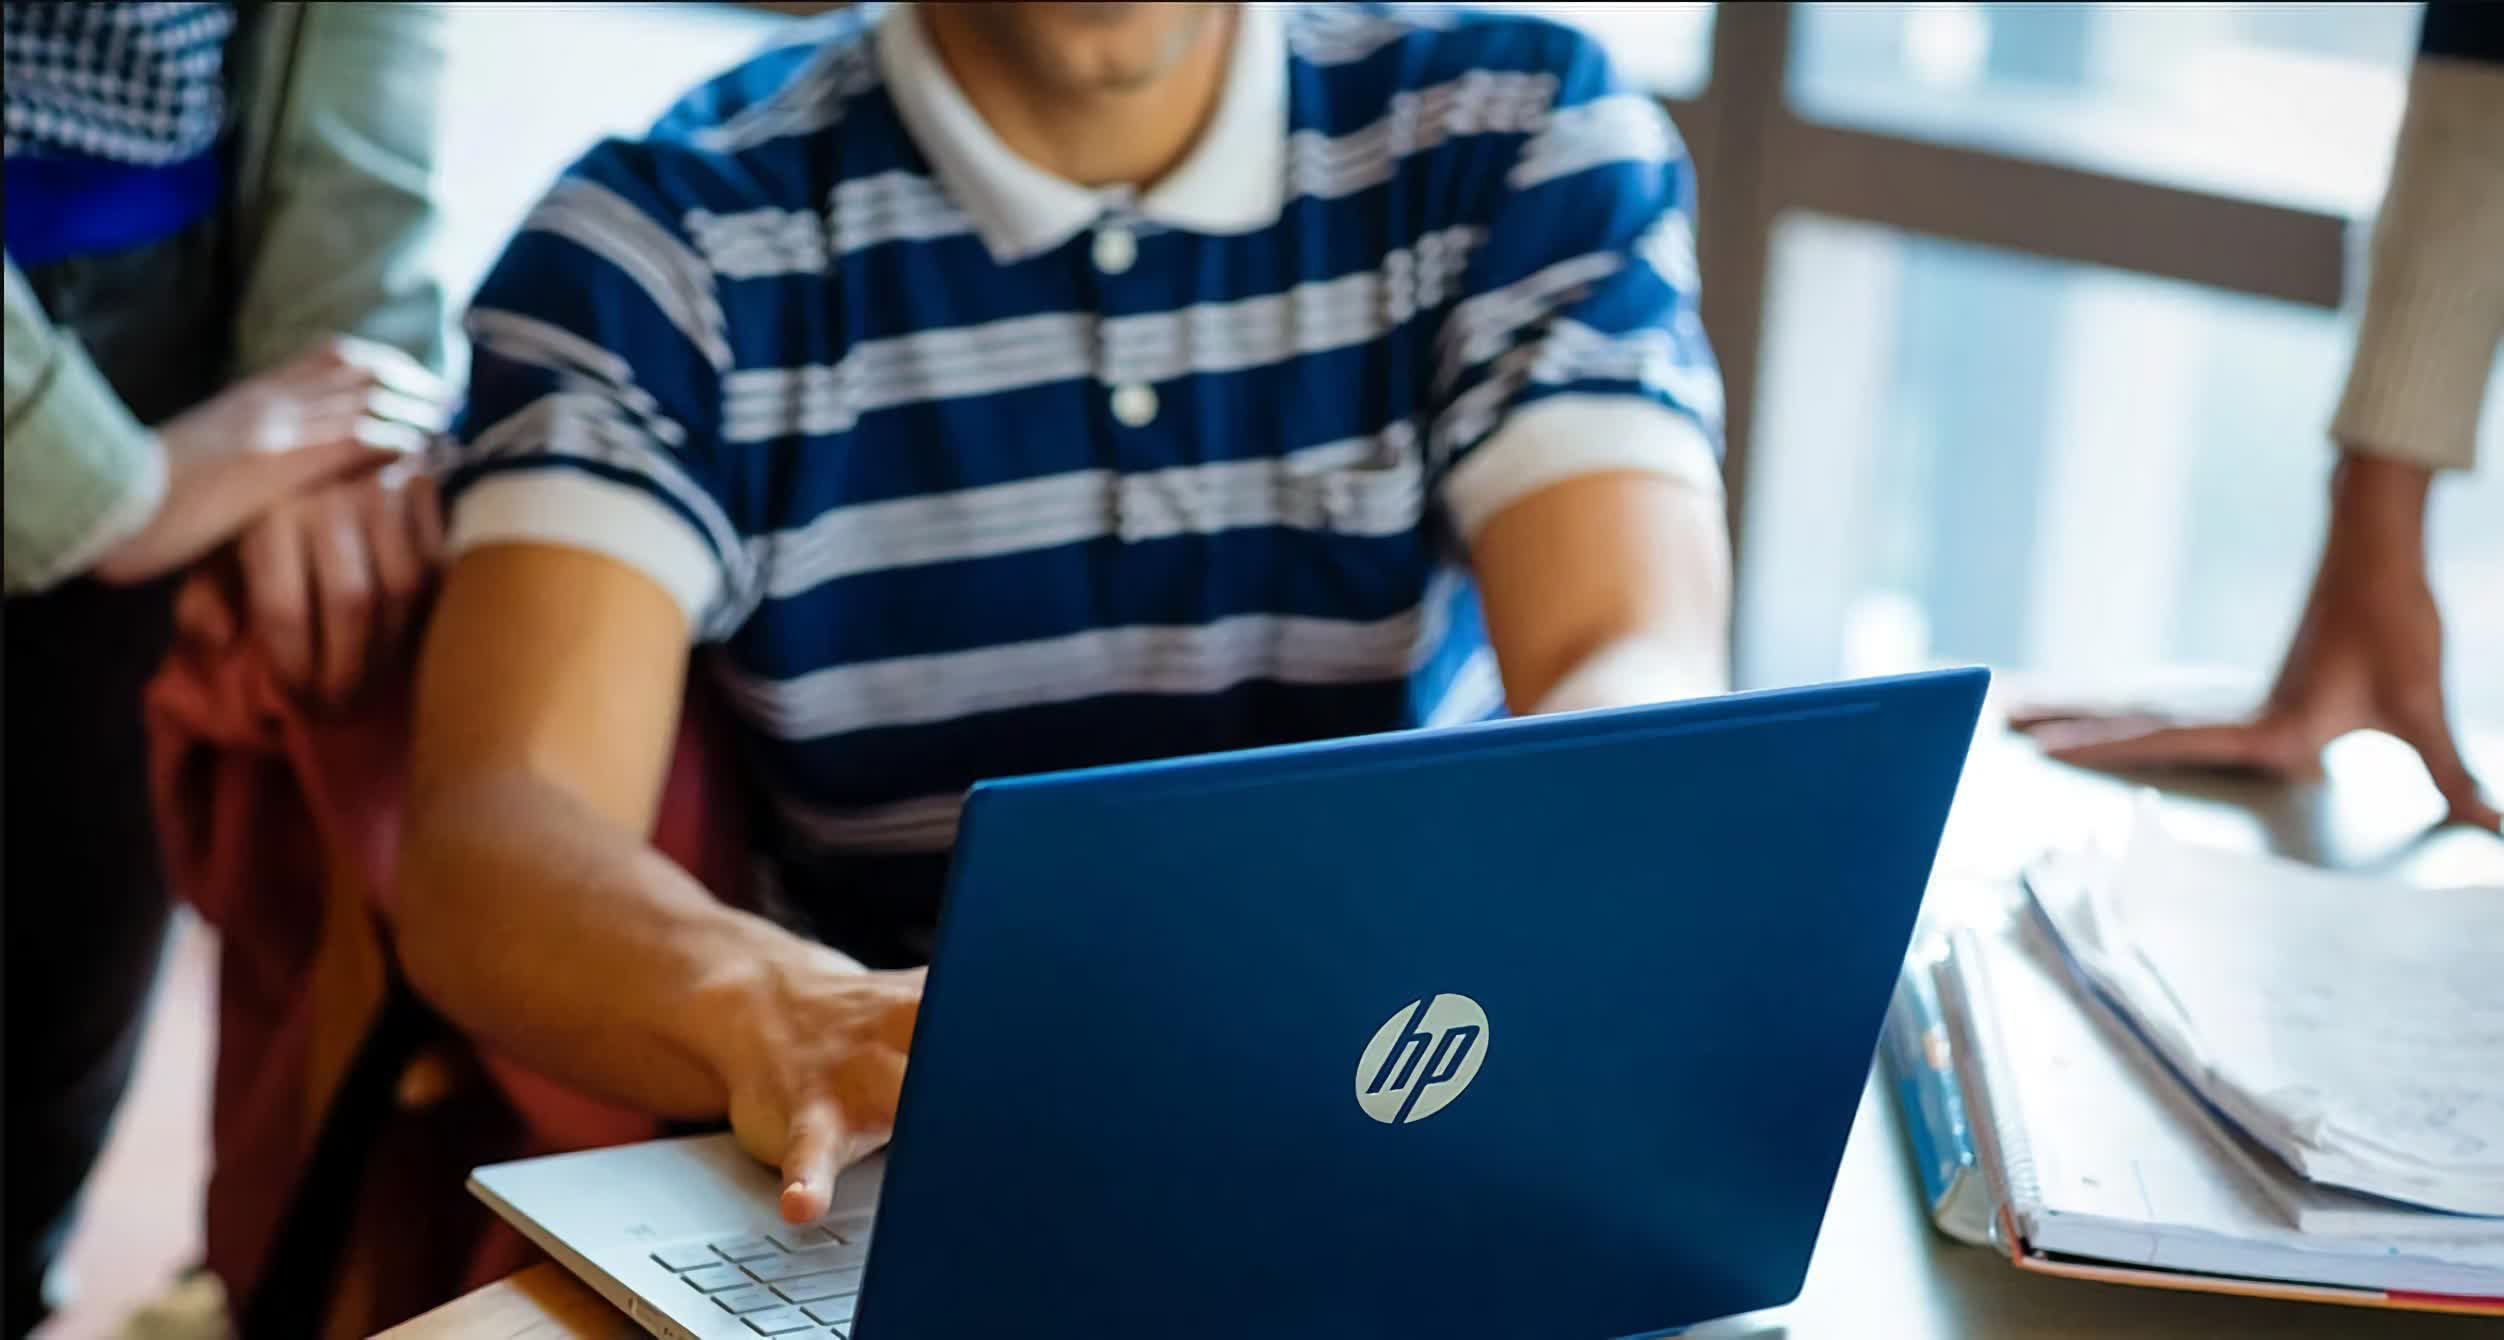 HP pushes out BIOS update addressing high-severity vulnerabilities affecting 200+ models